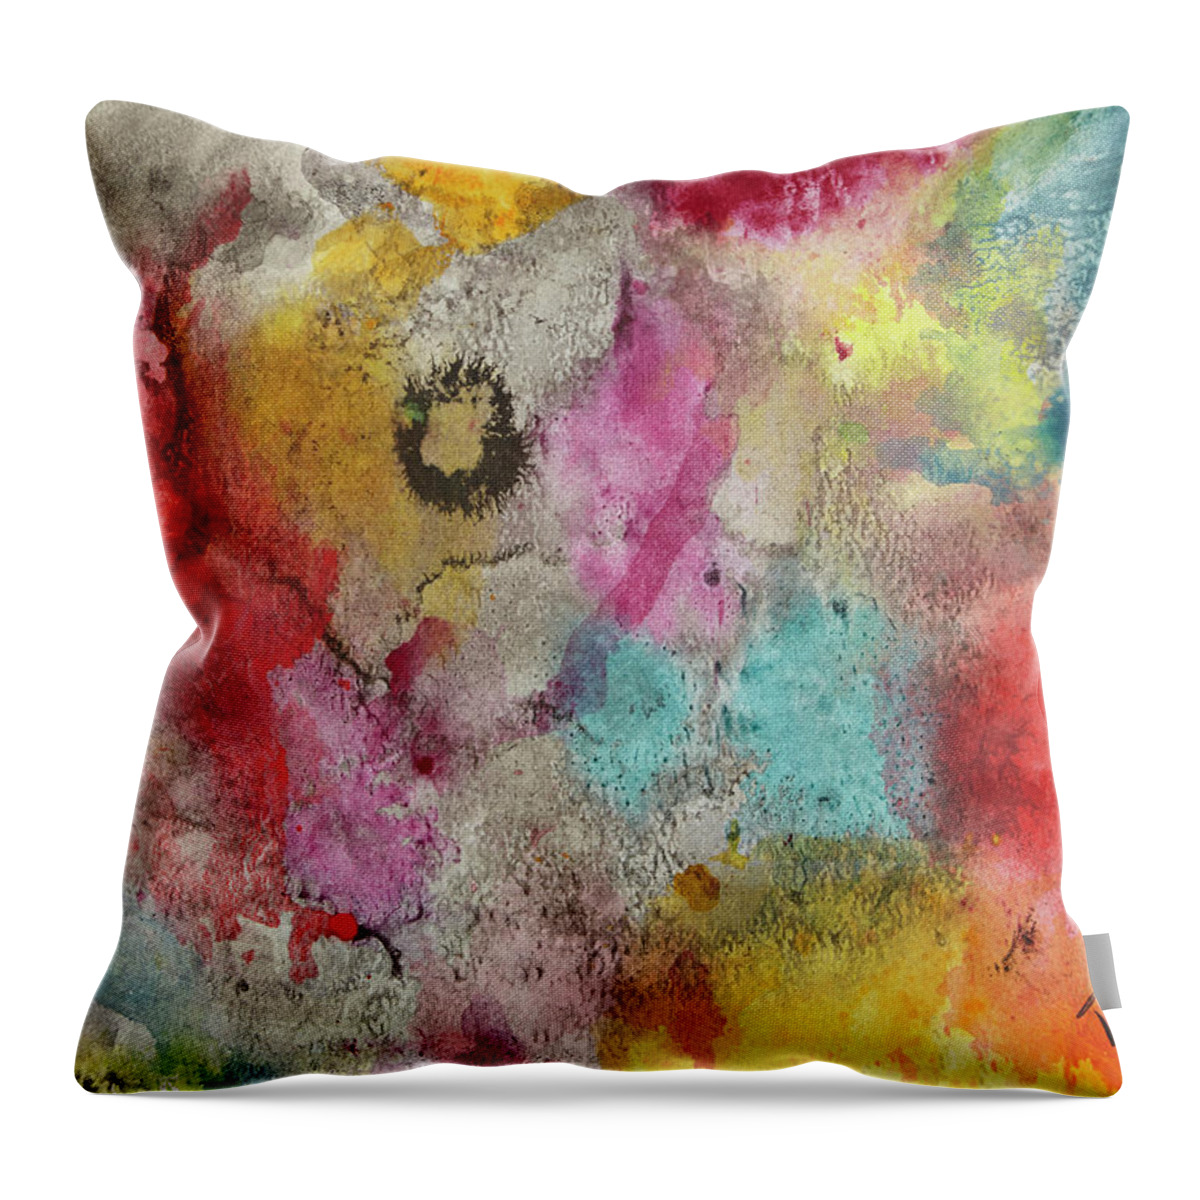 Abstract Throw Pillow featuring the painting True Colors by Tessa Evette